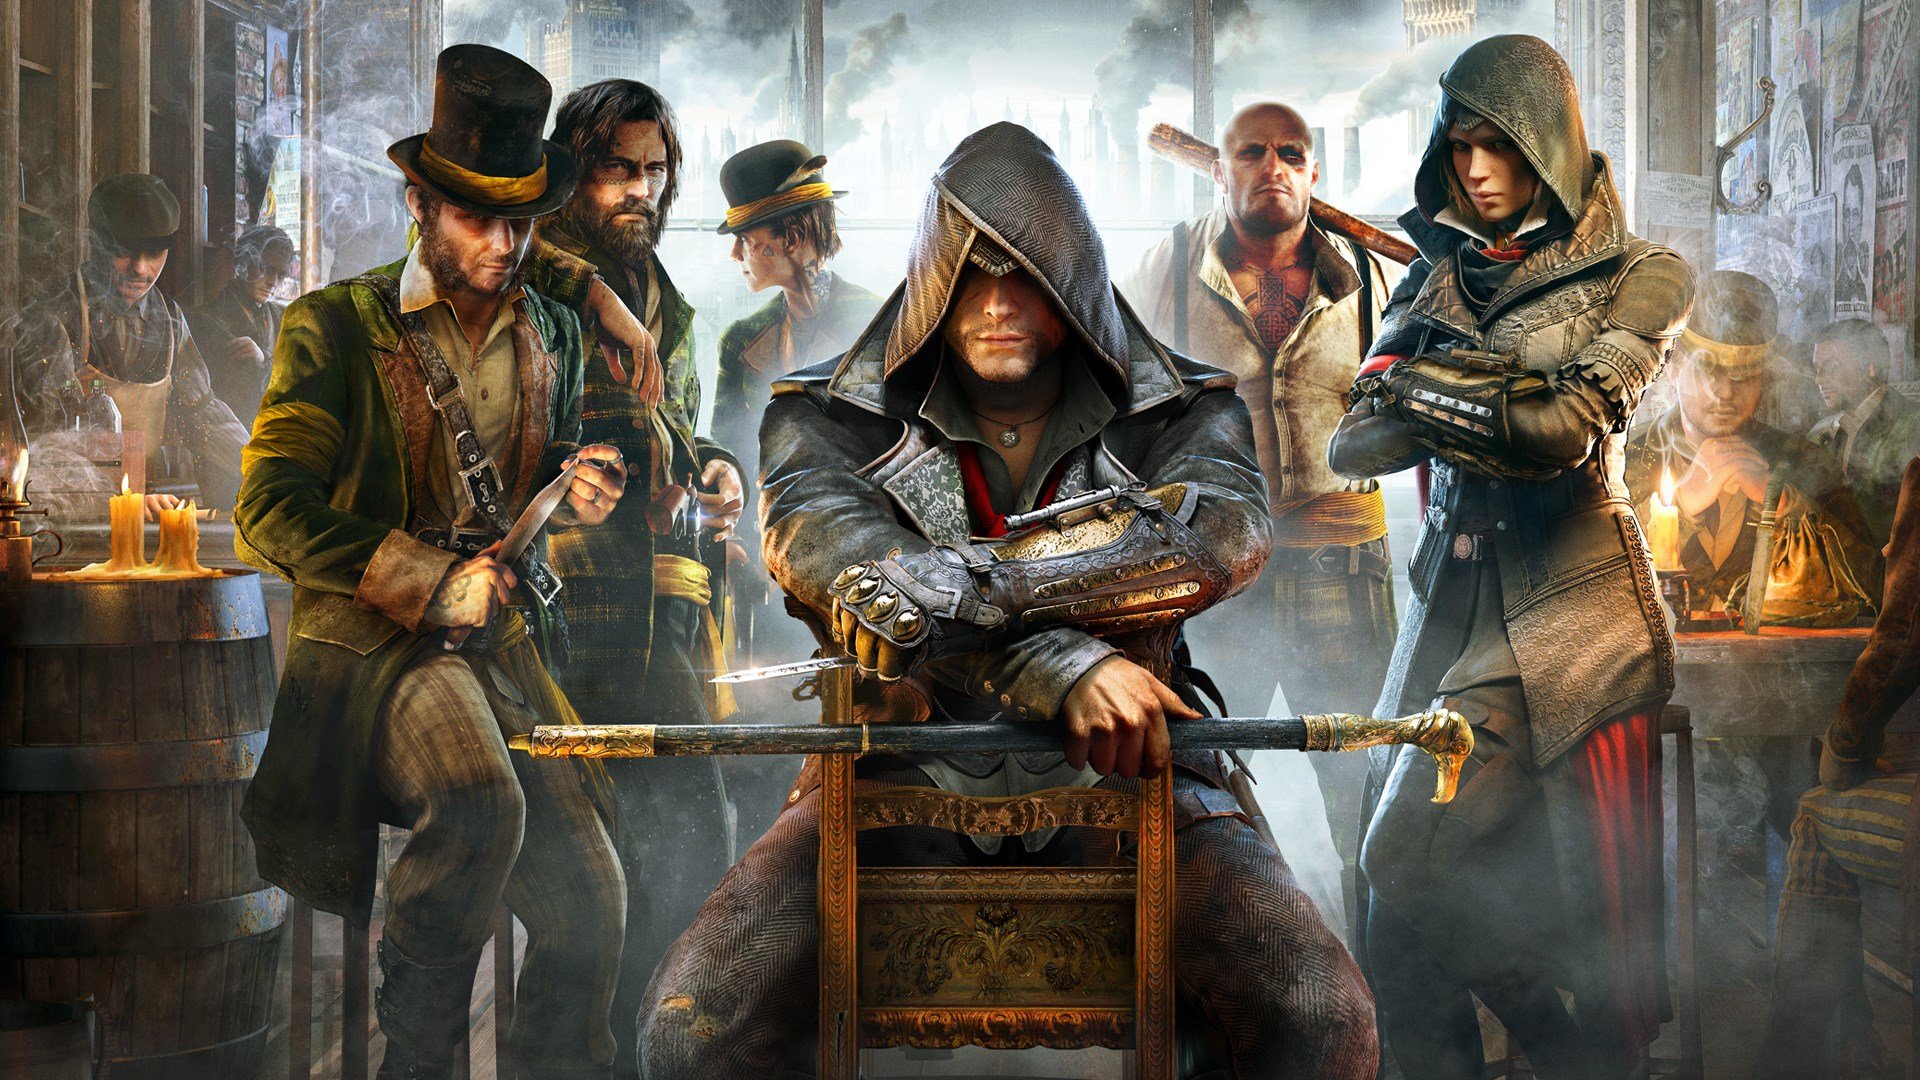 Assassin's Creed® Syndicate cover image